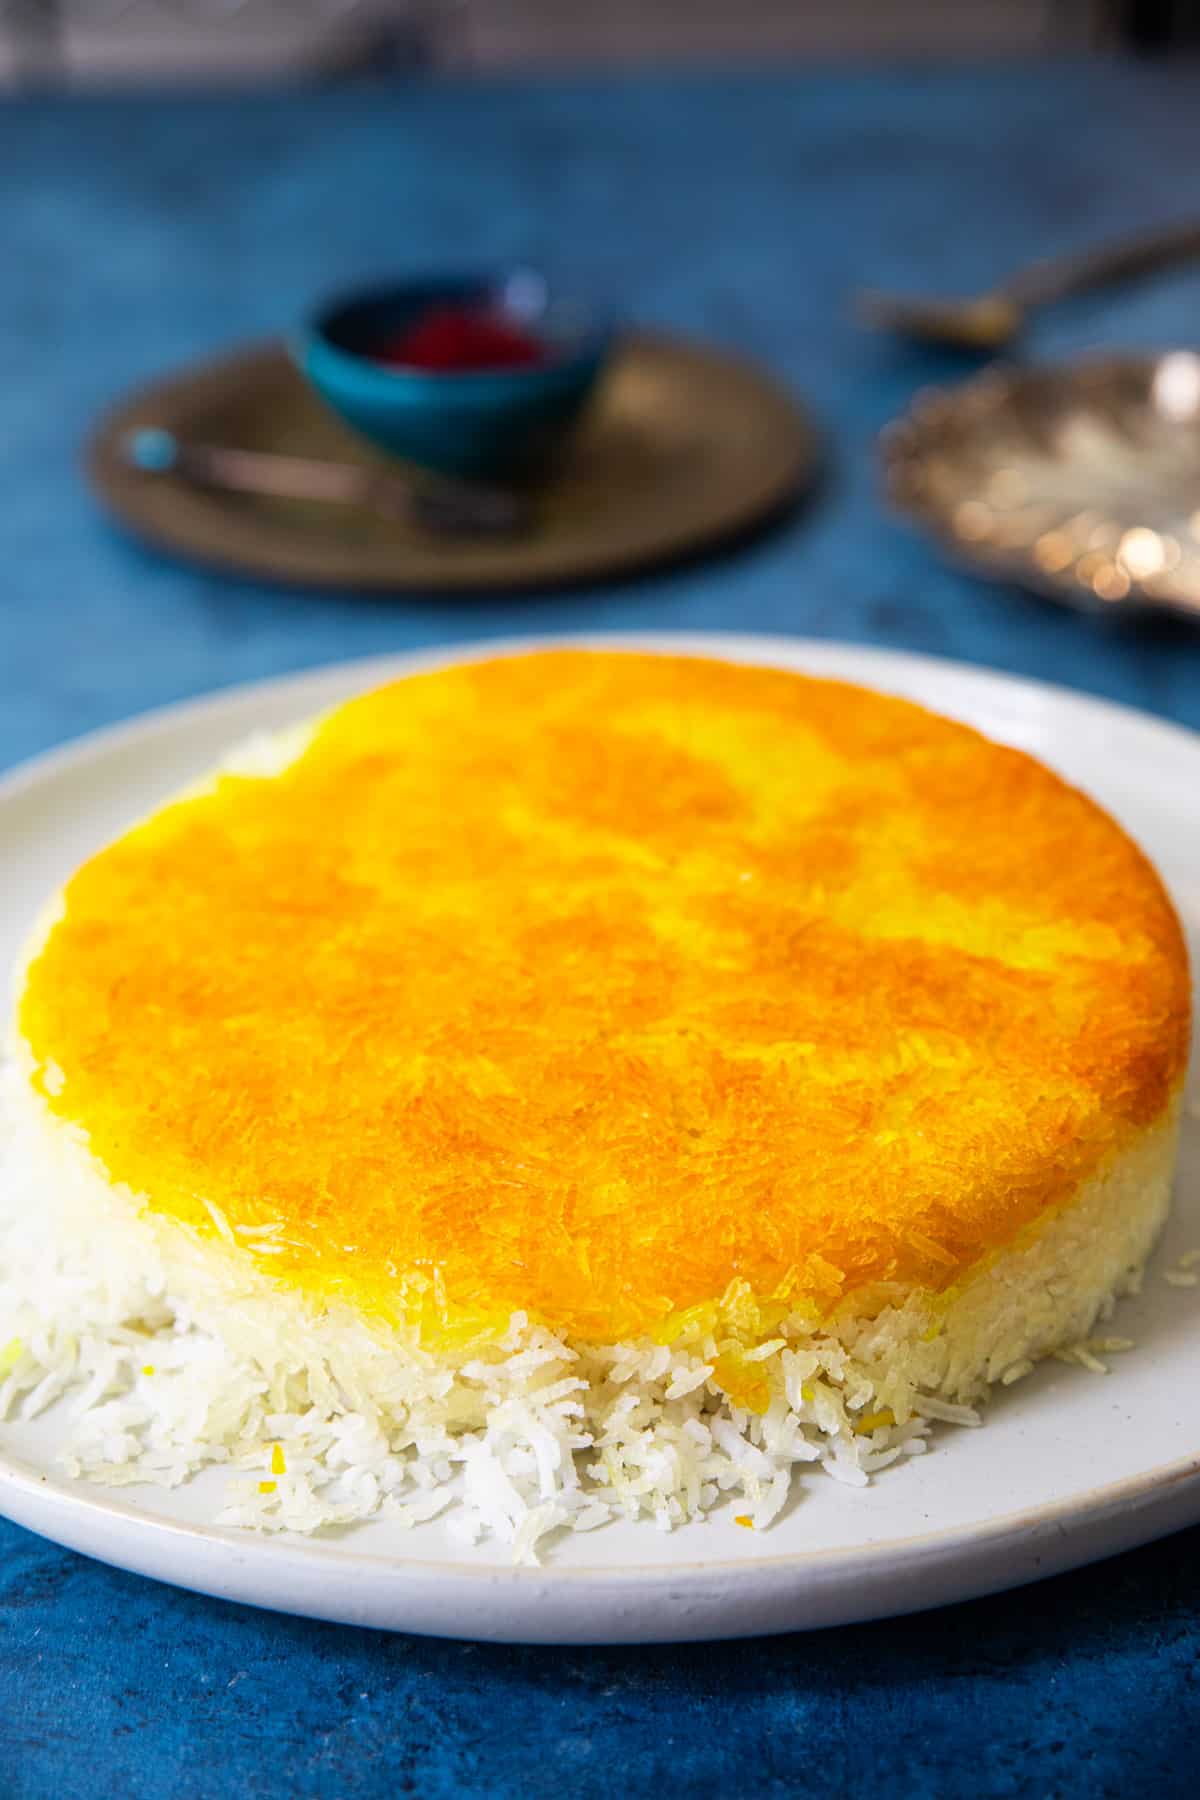 Learn how to make the best crispy tahdig at home with this easy tutorial. This Persian classic is easier than you might think, just follow my tips and your tahdig will come out perfect every time.
